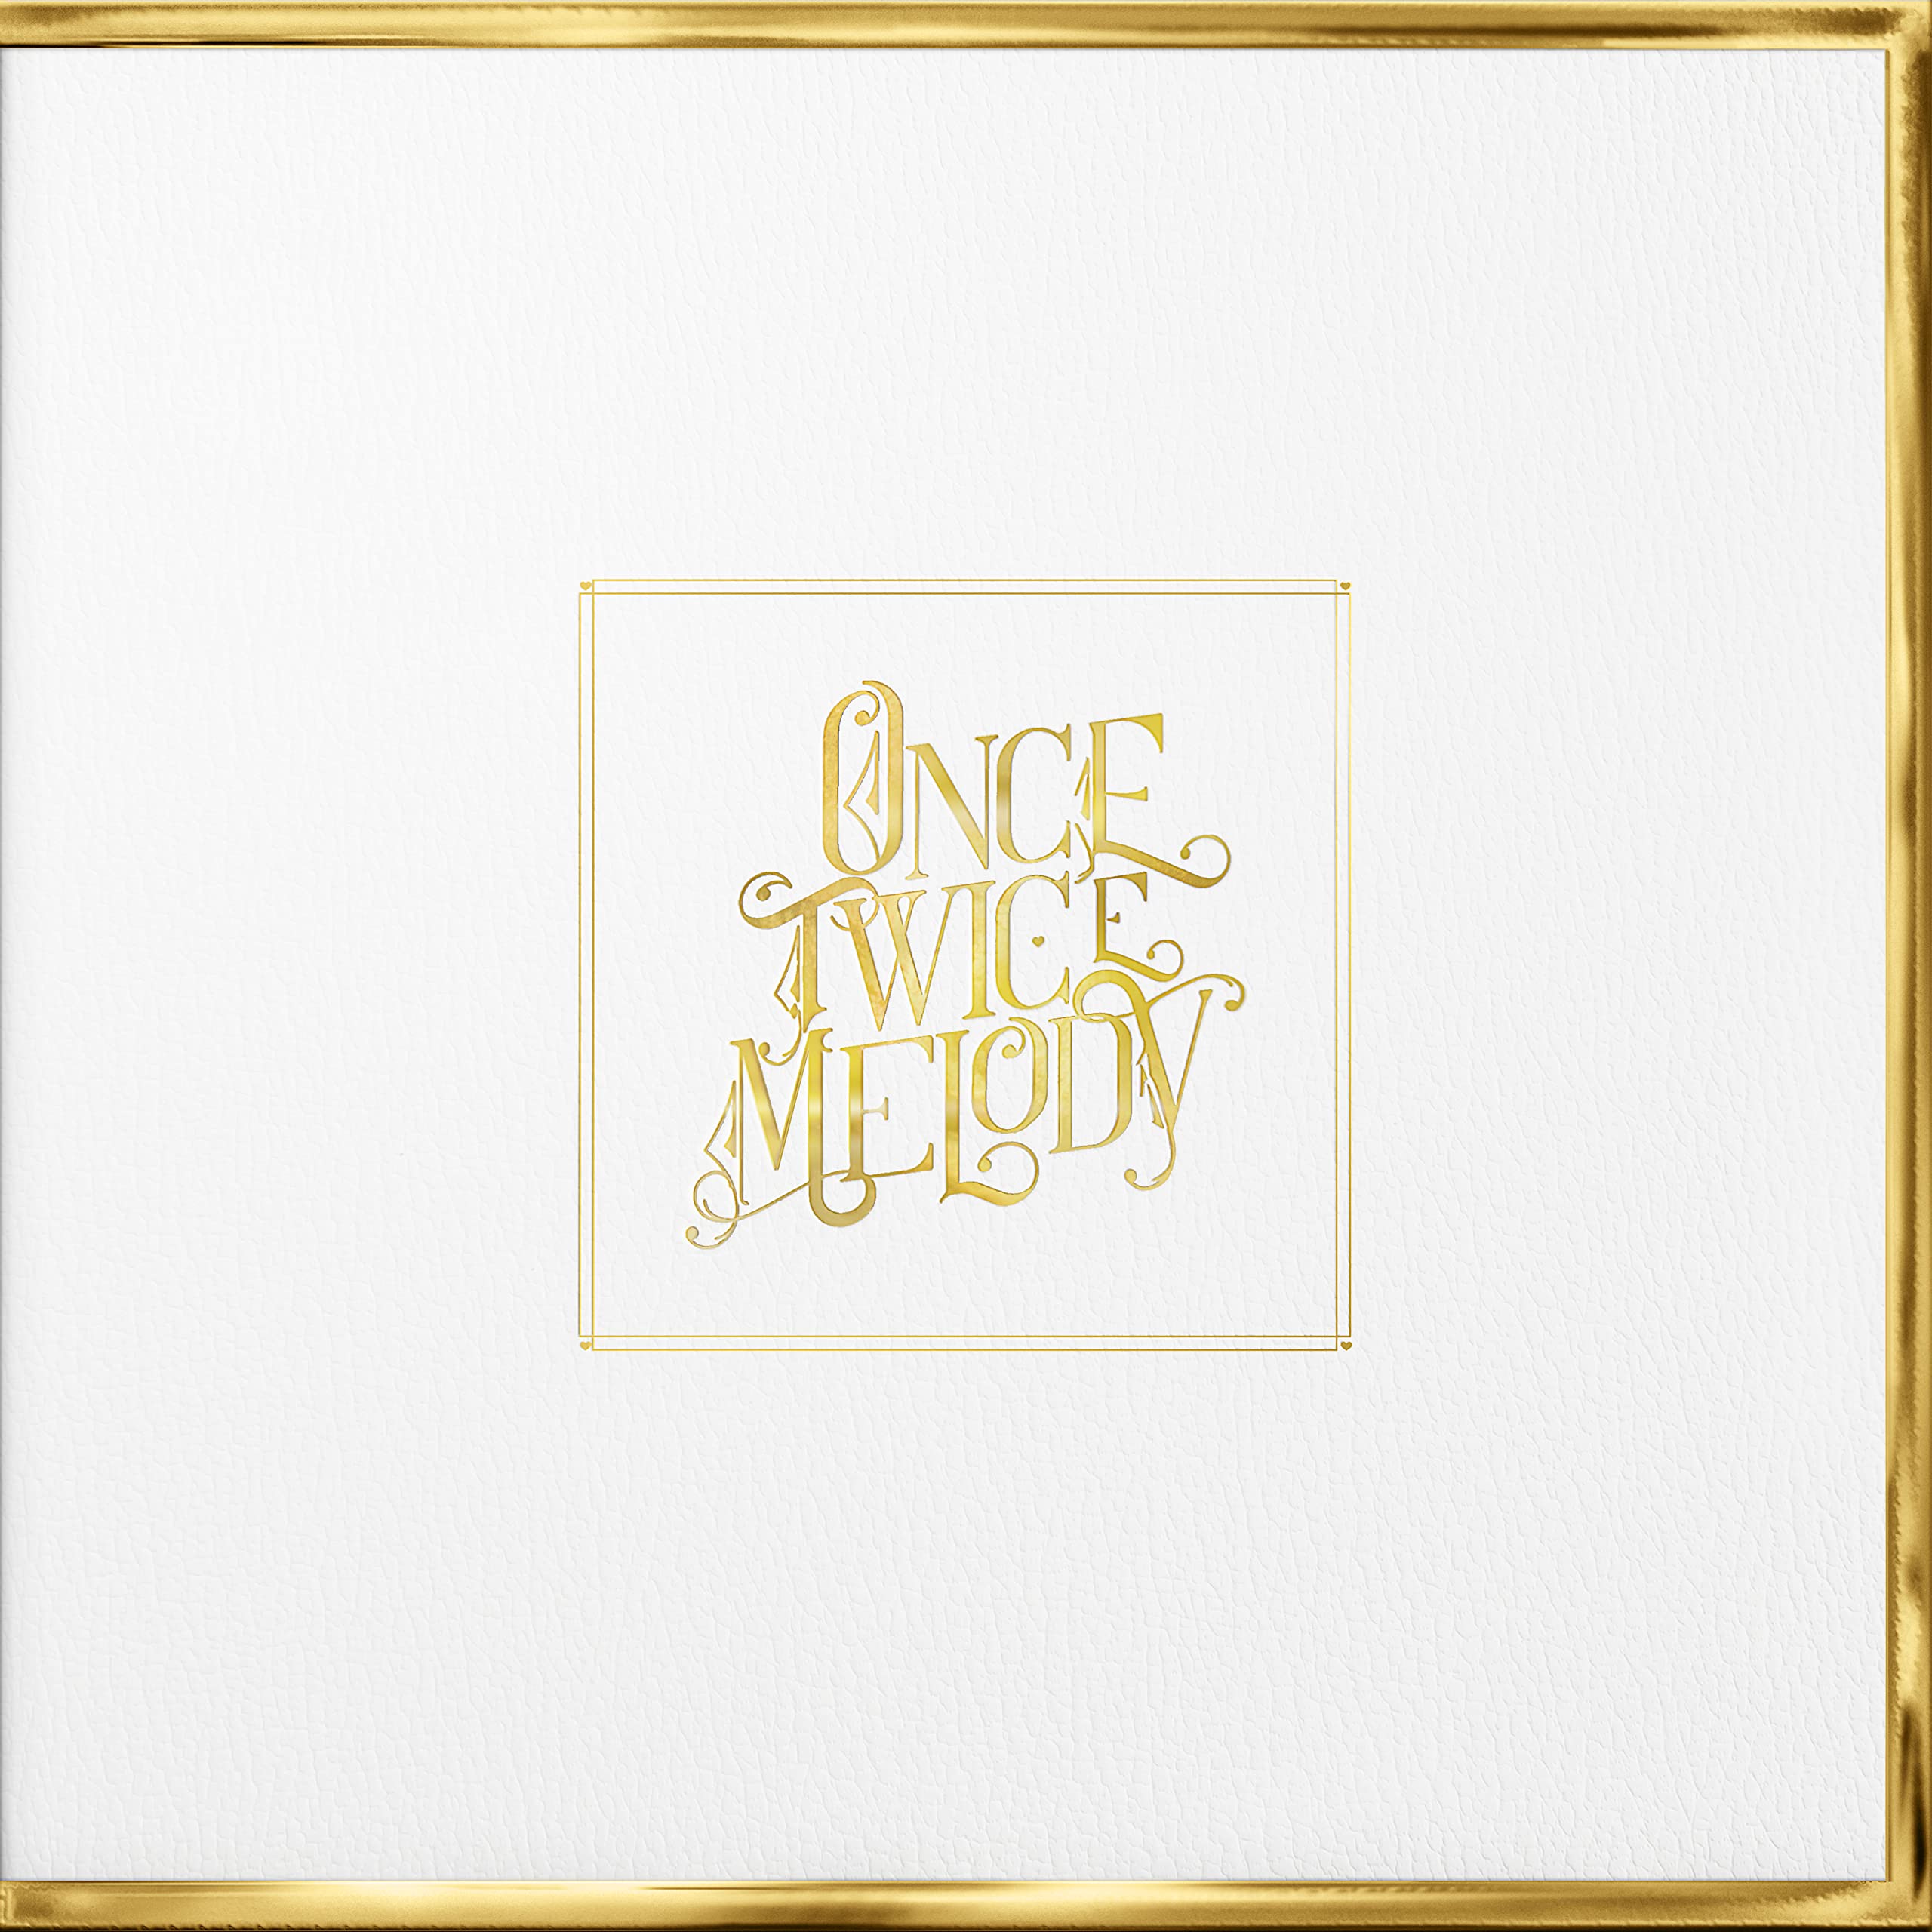 Beach House - Once Twice Melody Chapter 2 (2021) [FLAC 24bit/48kHz]